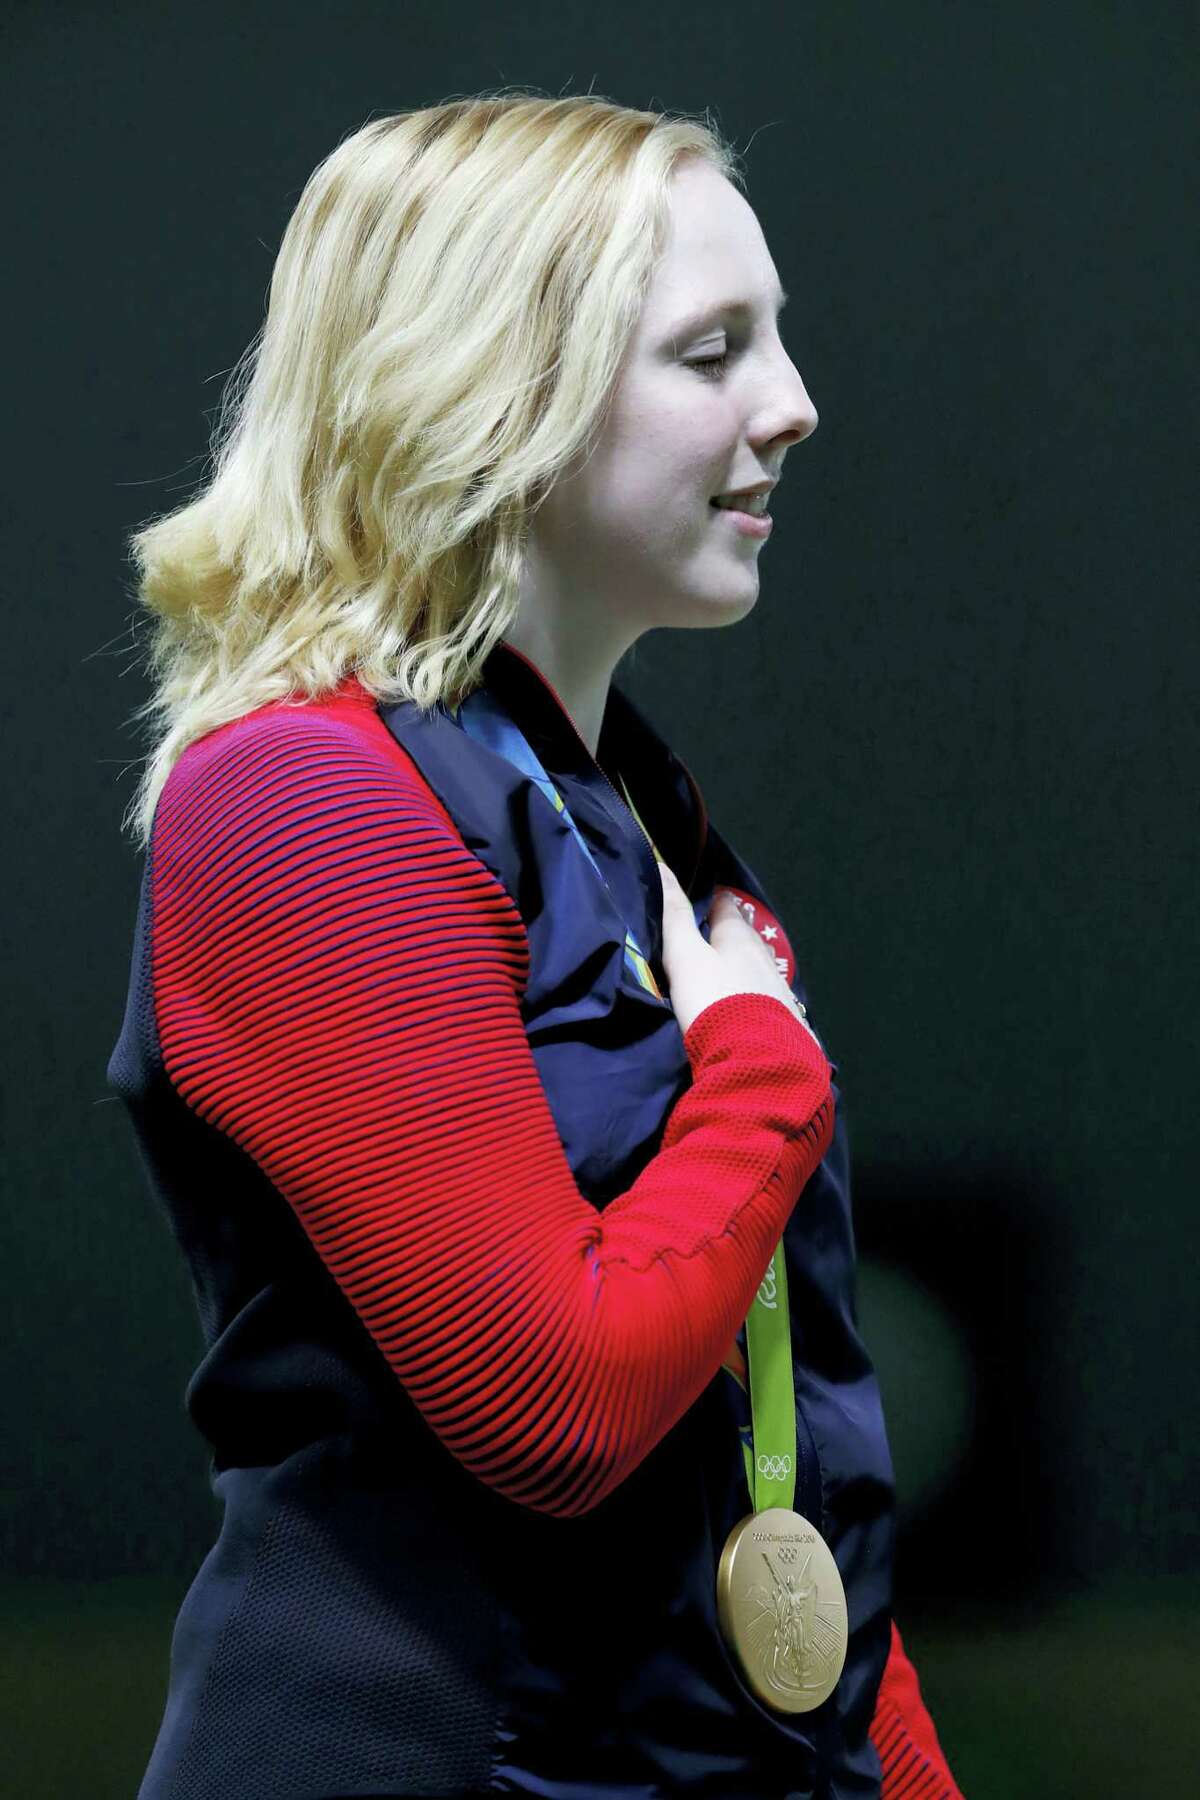 Gold medal winner, Virginia Thrasher of the United States, sings along with the U.S. national anthem after receiving the gold medal during the victory ceremony for the Women’s 10m Air Rifle event at Olympic Shooting Center at the 2016 Summer Olympics in Rio de Janeiro on Saturday.